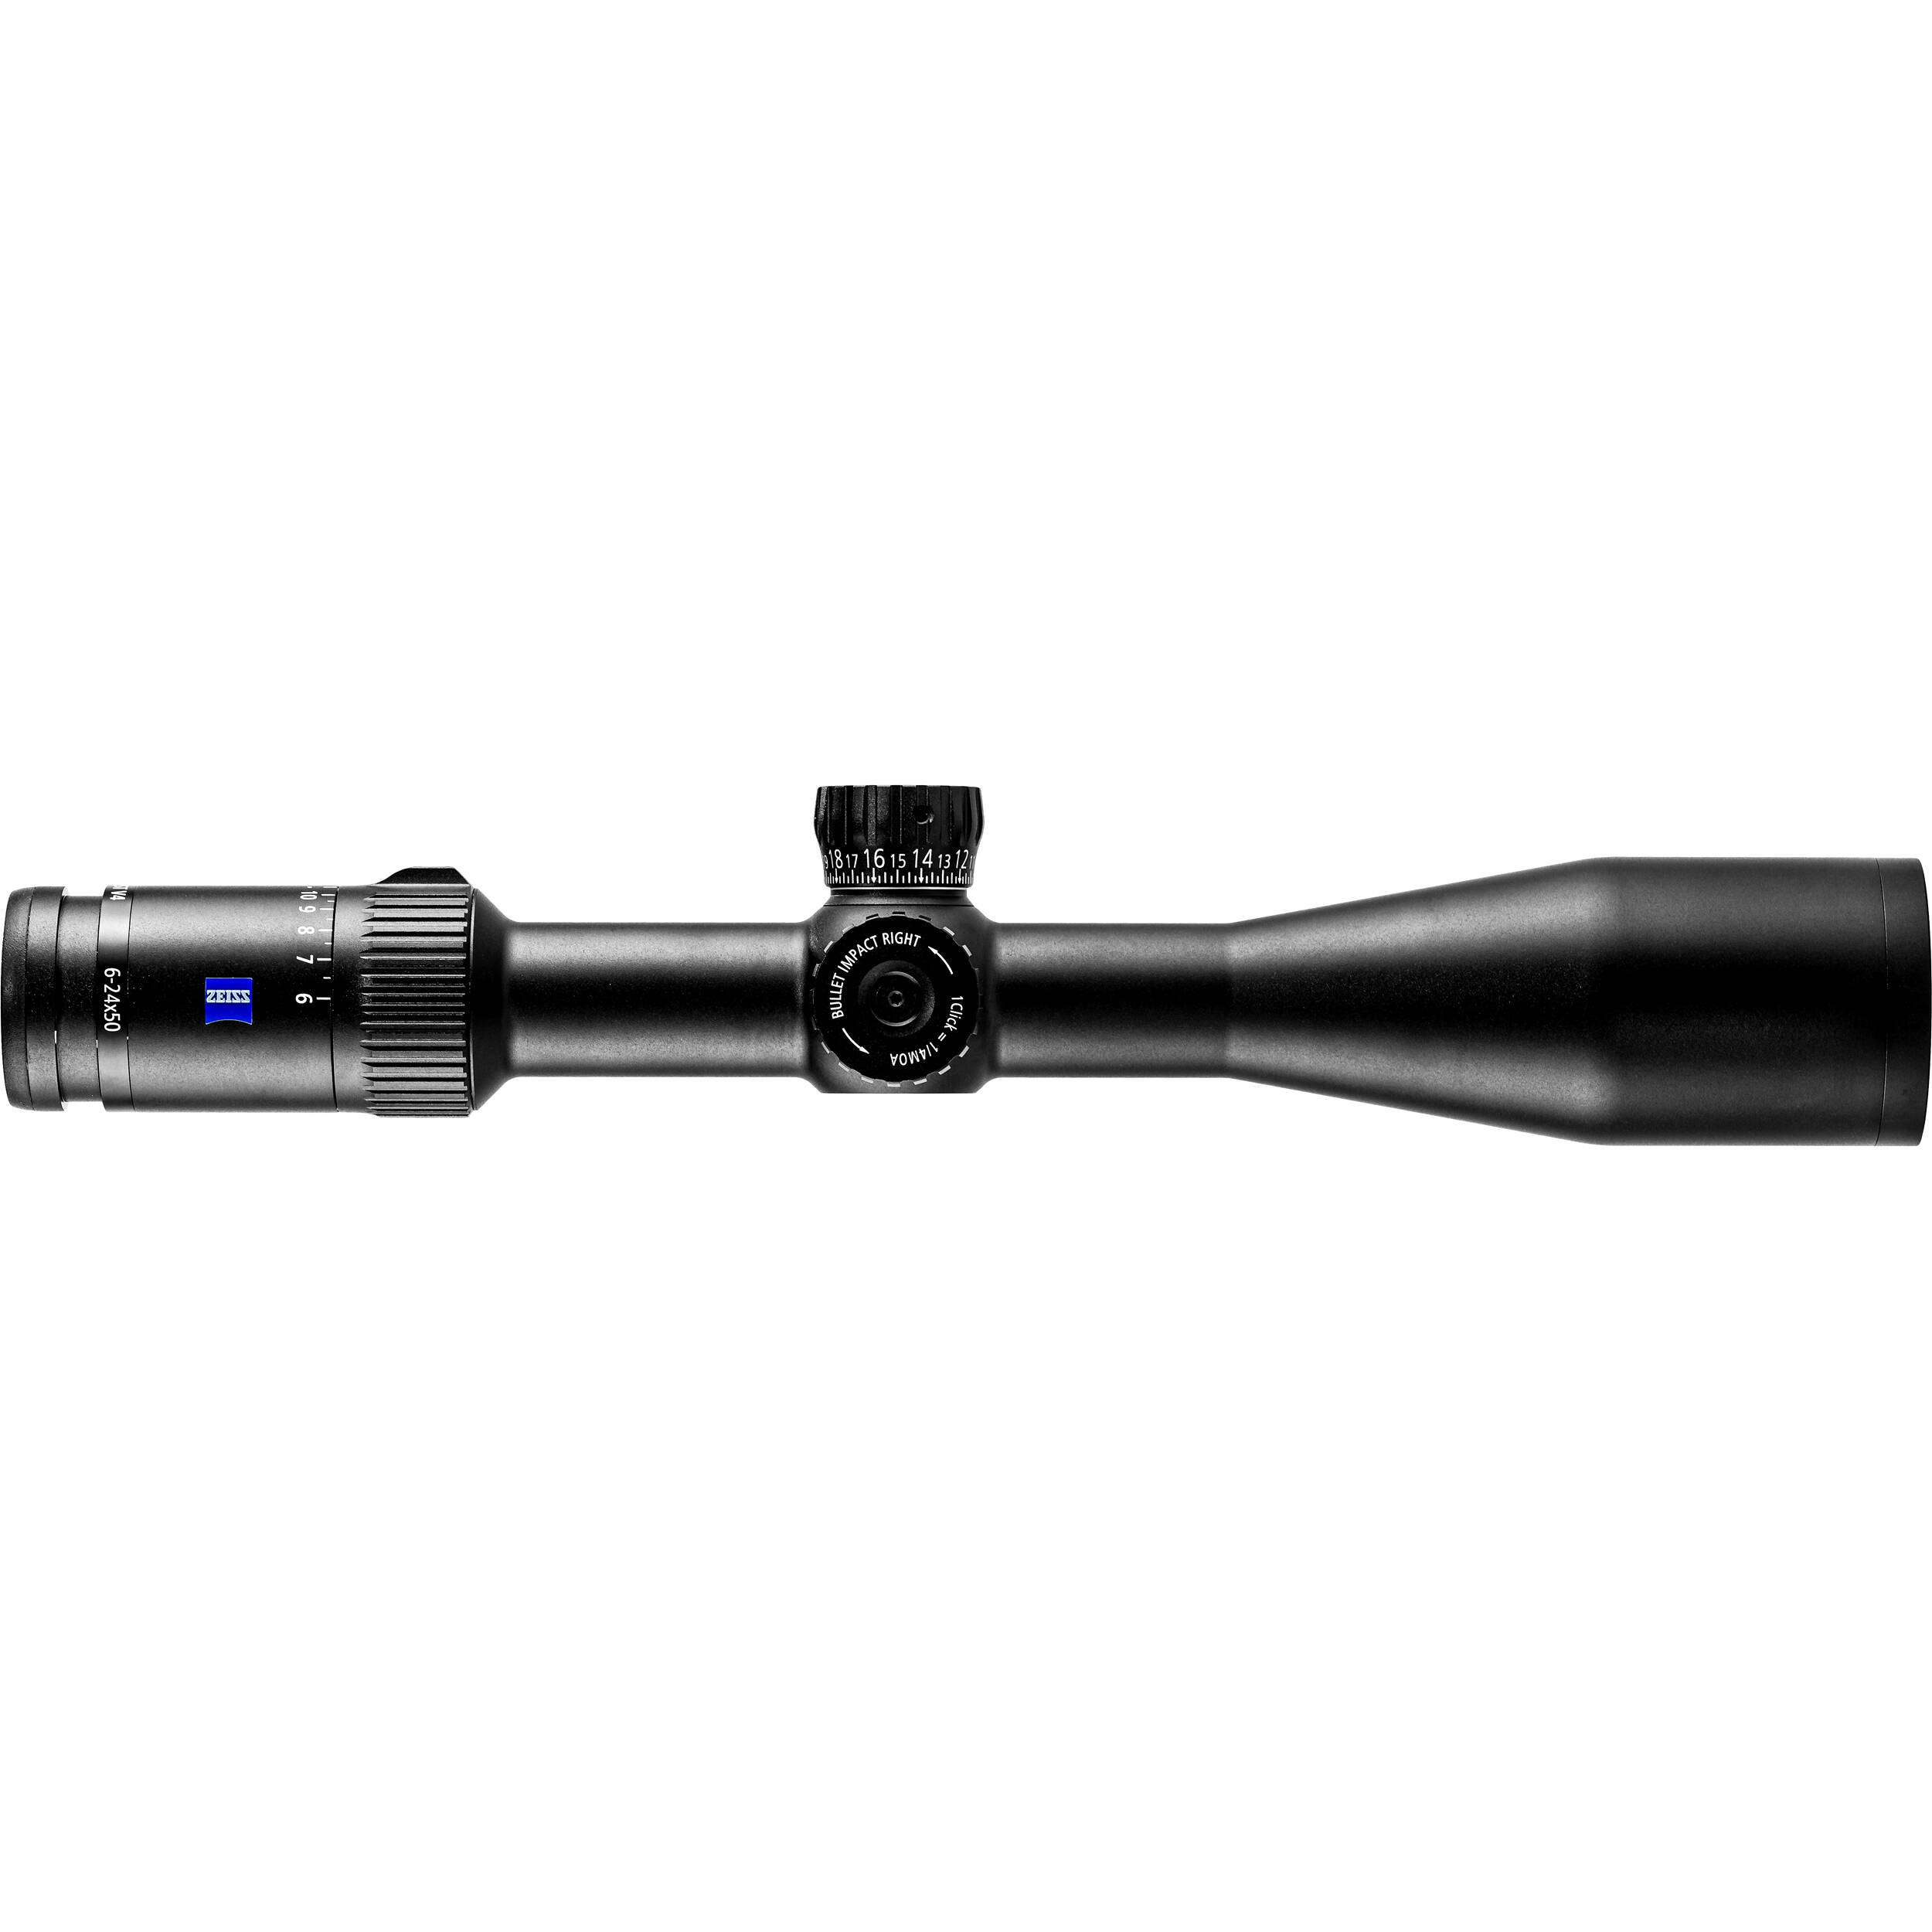 Zeiss Conquest V4 6-24X50 W/ #60 Illuminated Reticle